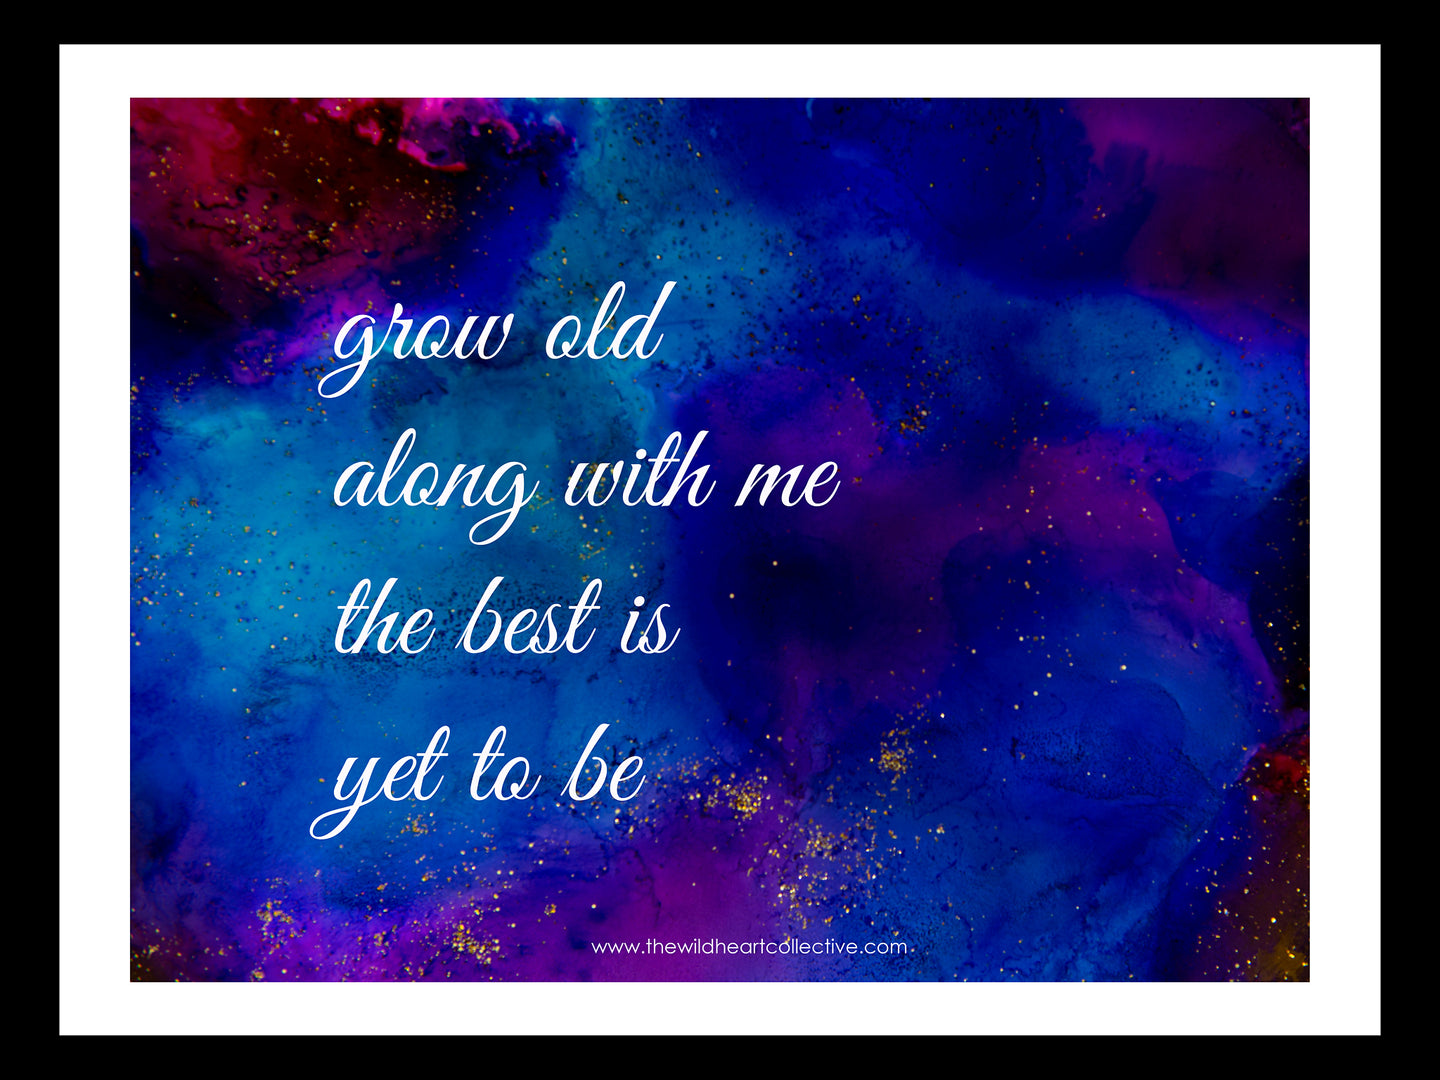 Custom Design: Grow Old Along With Me, The Best Is Yet To Be (Inspirational Quote)